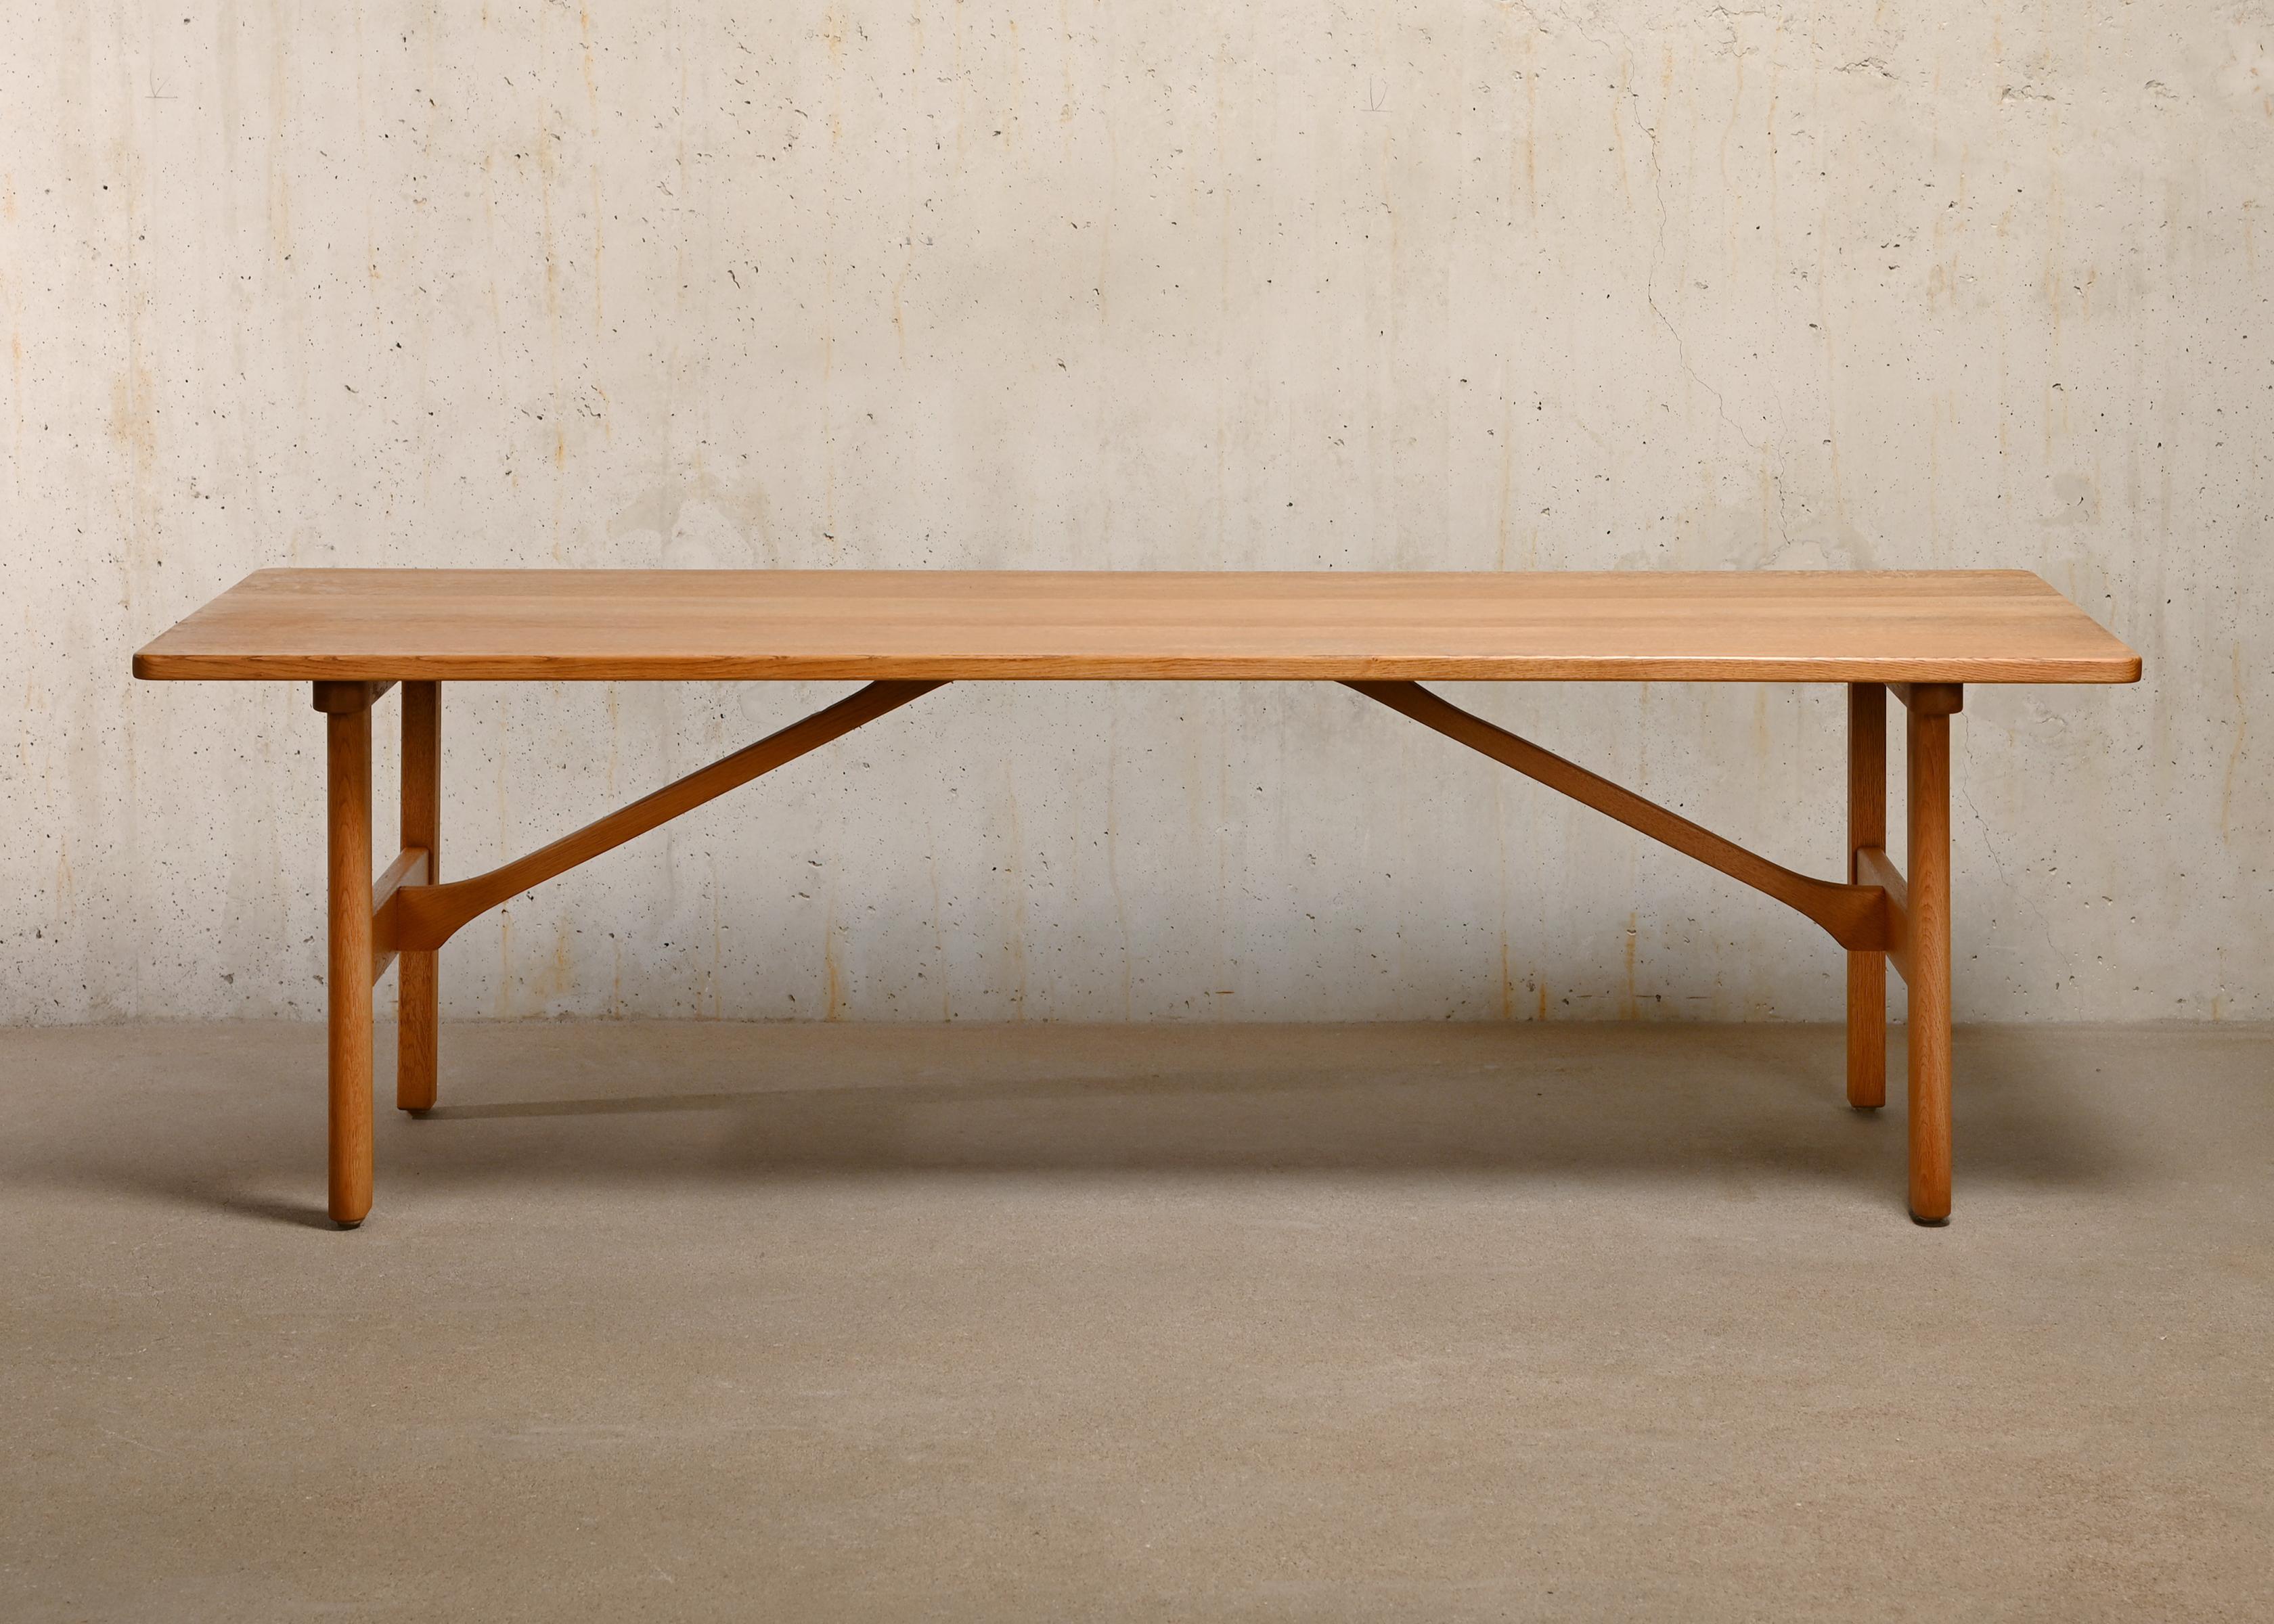 Coffee or sofa table model 5268 designed by Børge Mogensen for Fredericia Stolefabrik, Denmark. The solid oak frame and tabletop is in very good vintage condition with minimal traces of use. The table is signed with manufacturer labels and dated